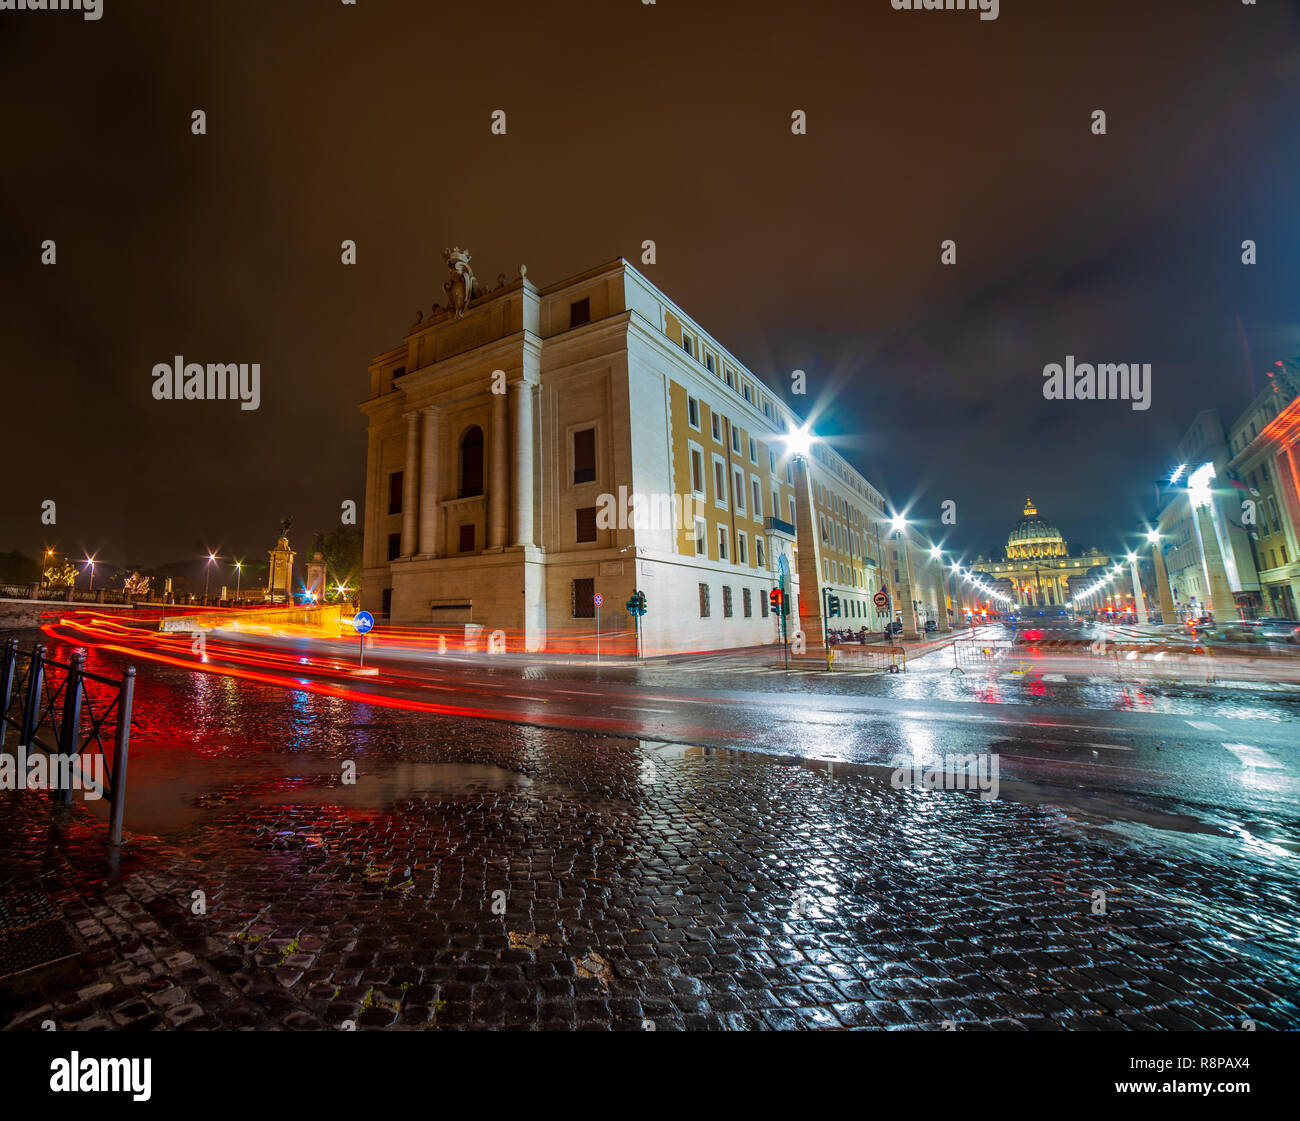 ROME,ITALY - JUNE 2018:  Piazza San Pietro and the Basilica of San Pietro during a cloudy and rainy Roman night. Rome at night. Stock Photo